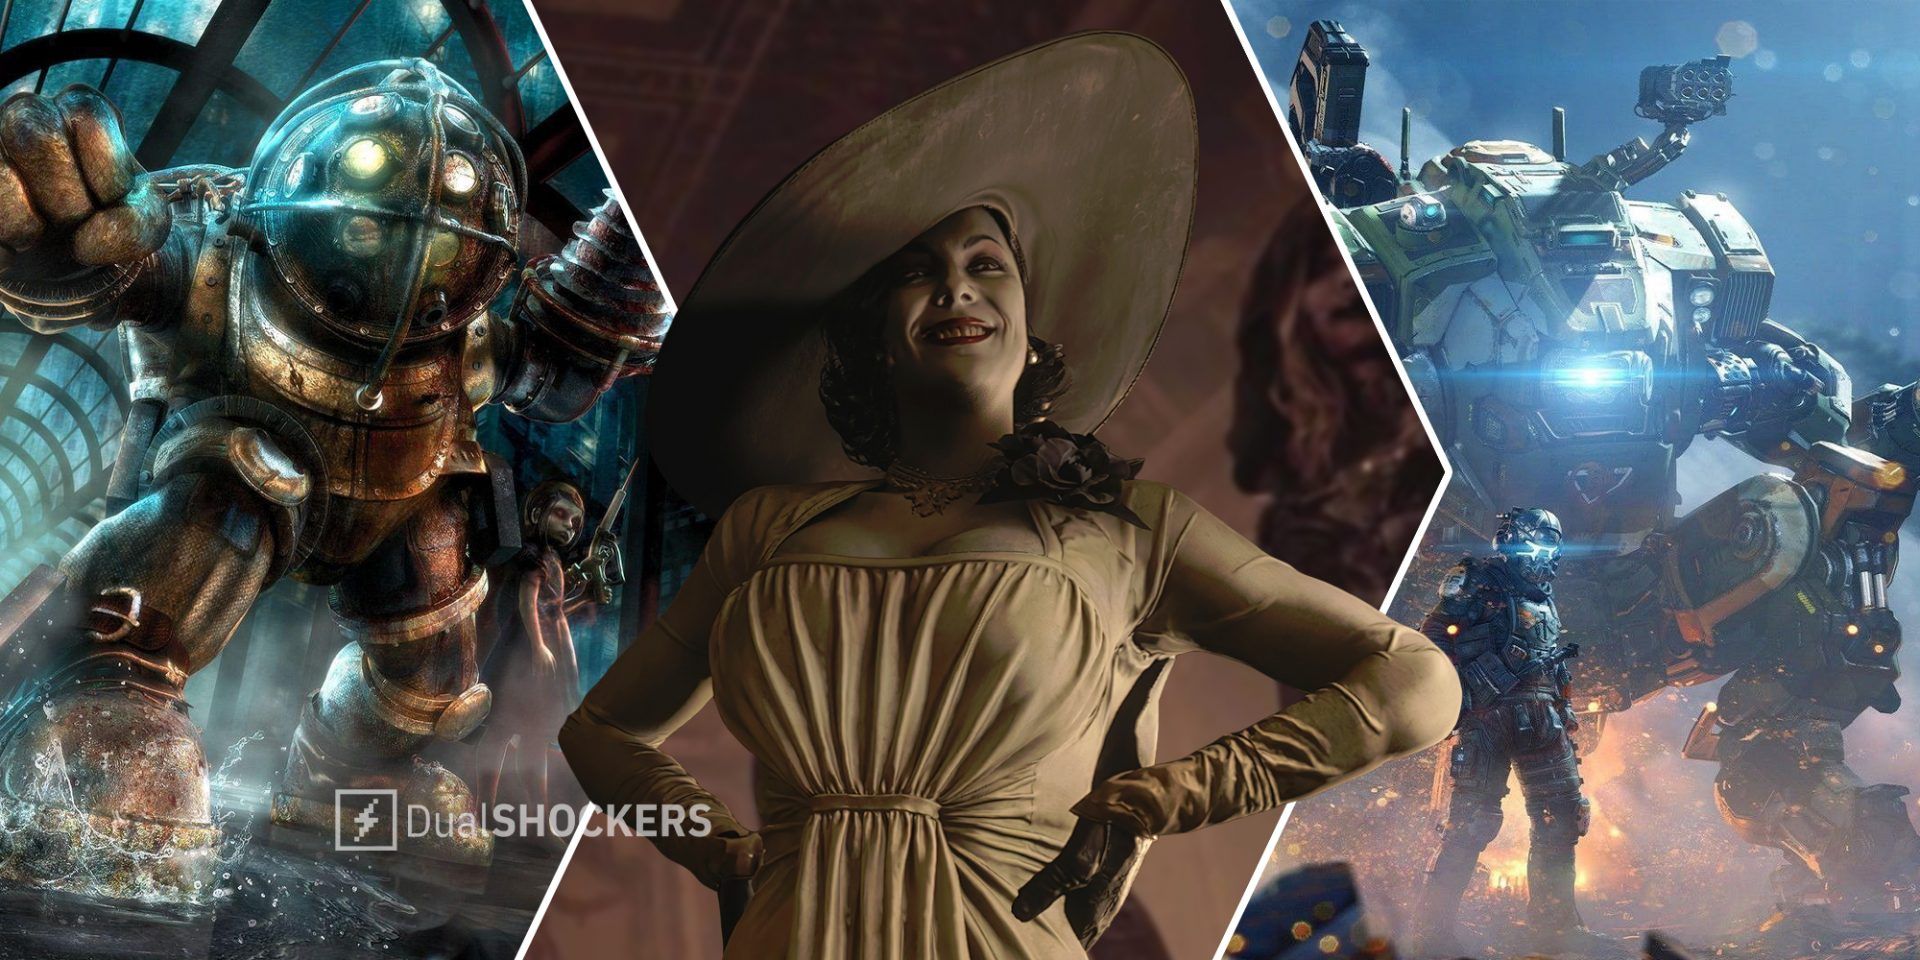 Bioshock Big Daddy on left, Resident Evil Village Lady Dimitrescu in middle, Titanfall 2 promo image on right